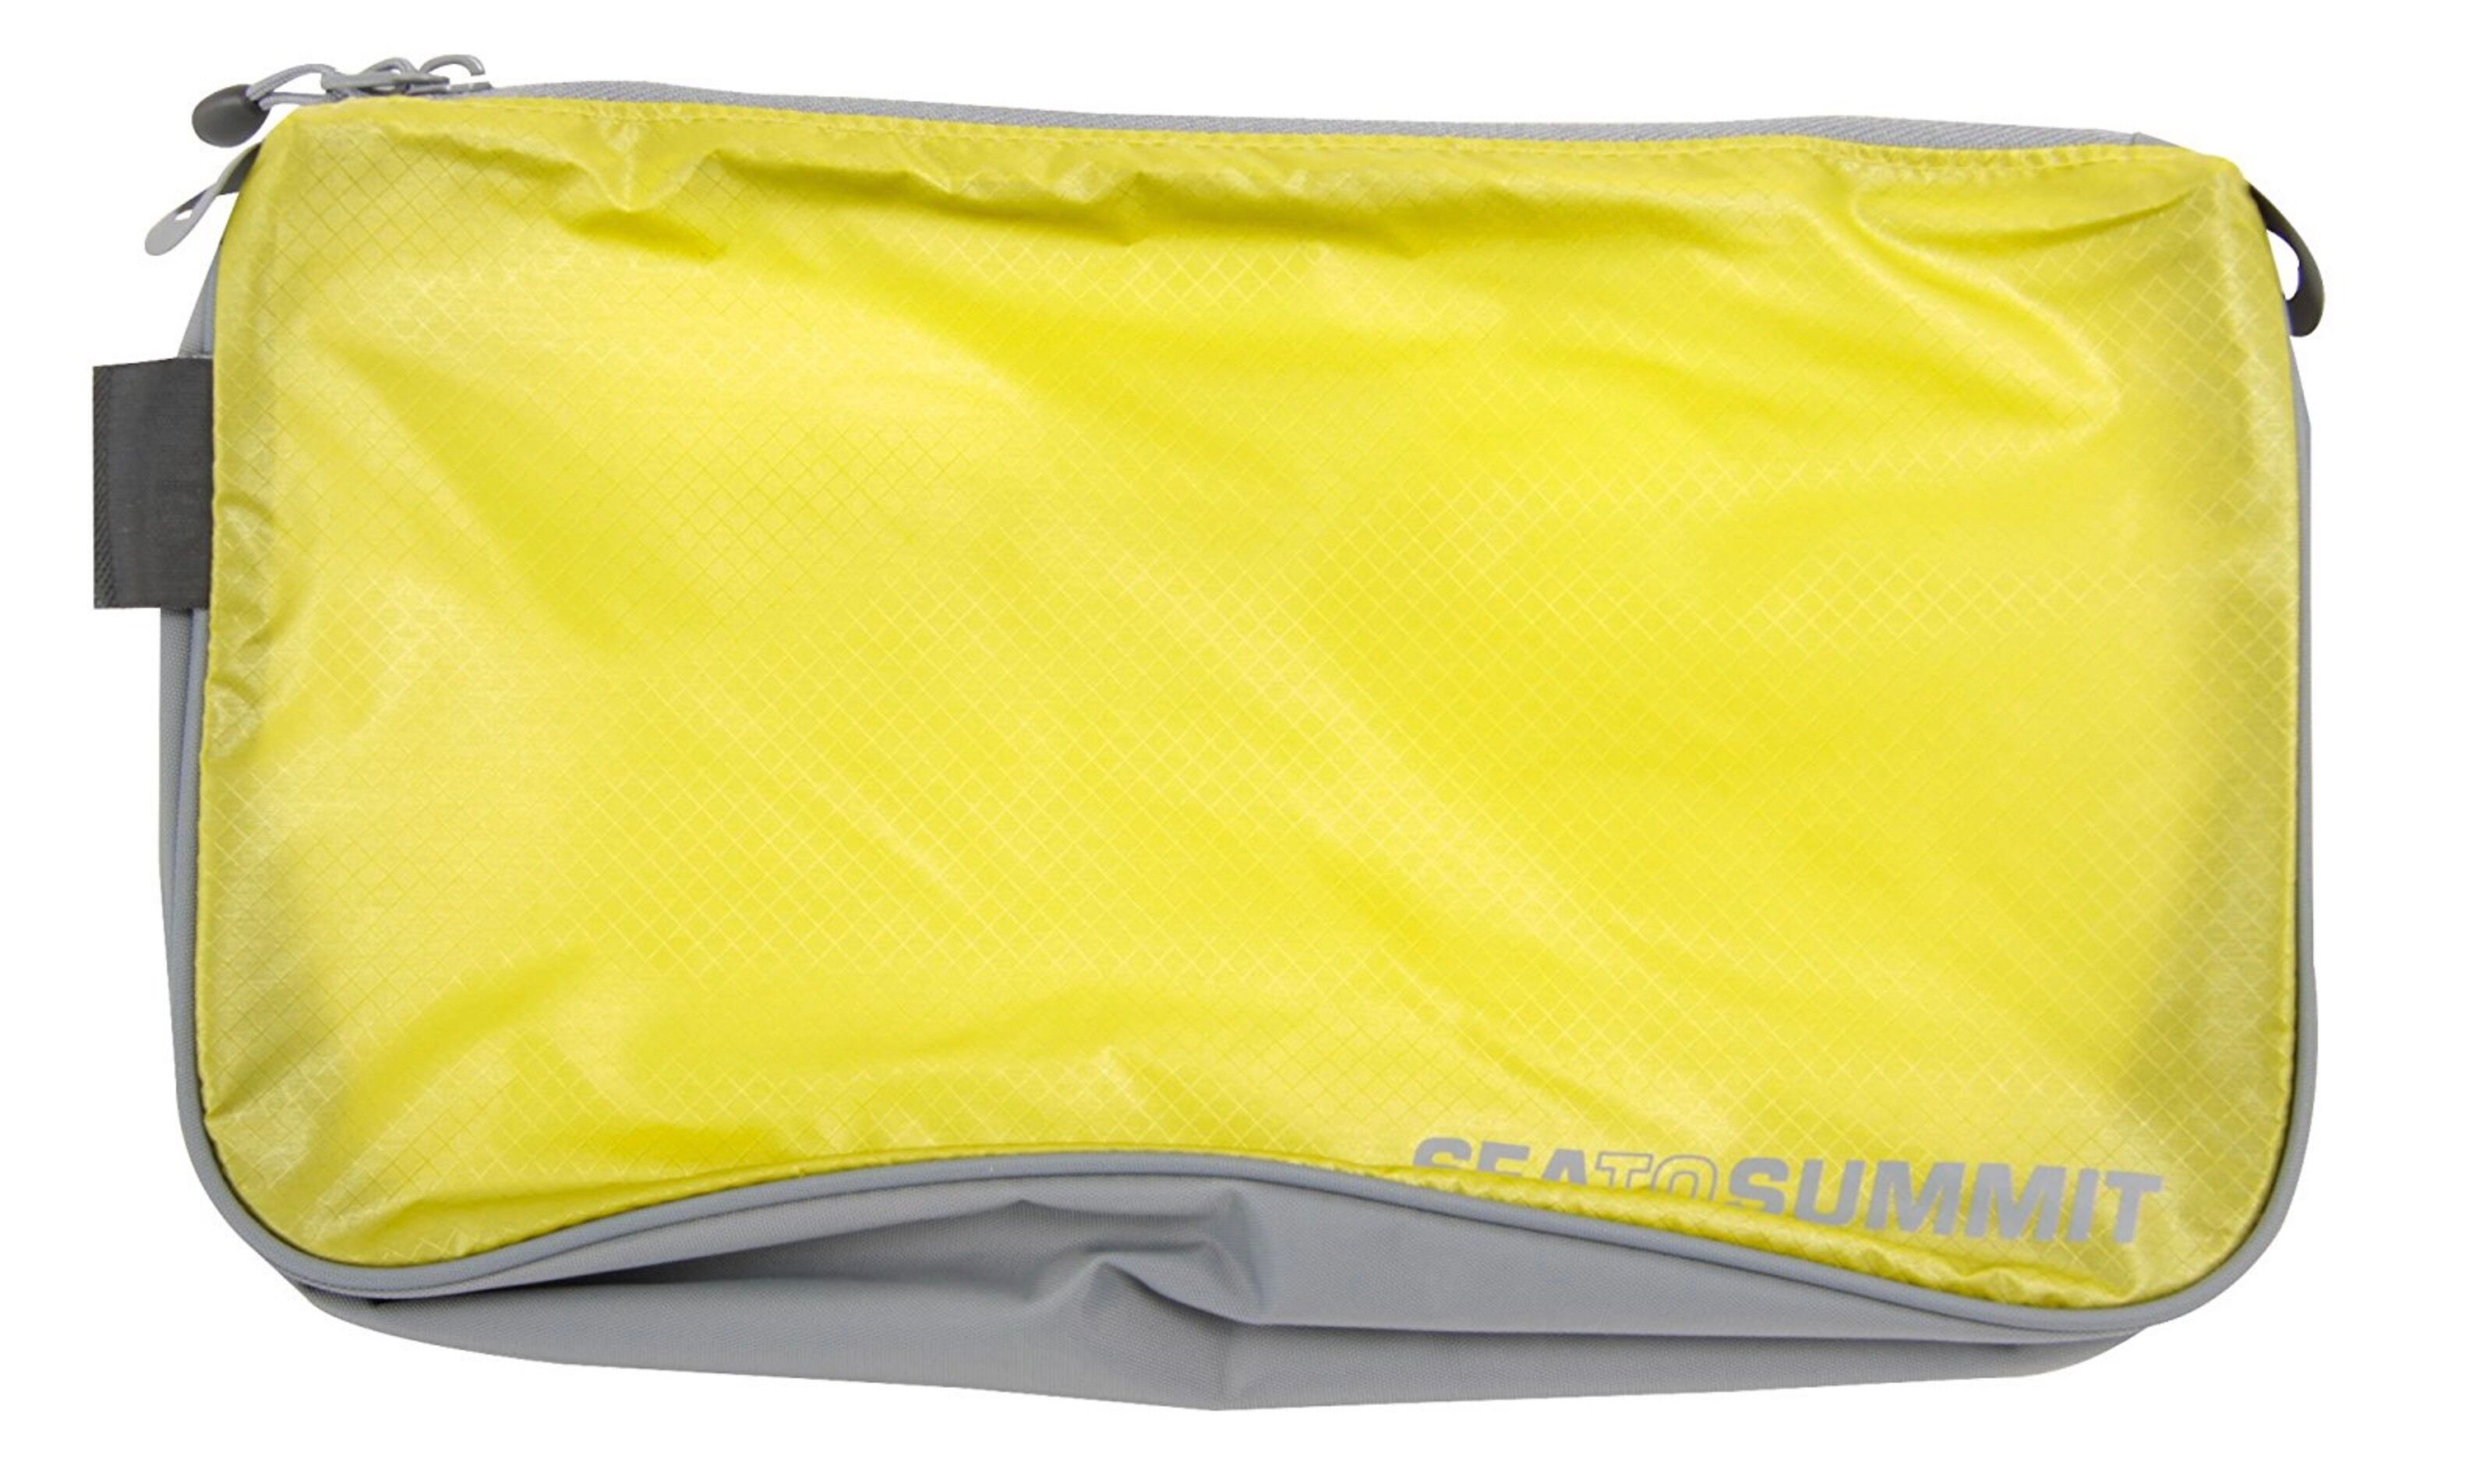 Sea To Summit - See Pouch - Wash bags